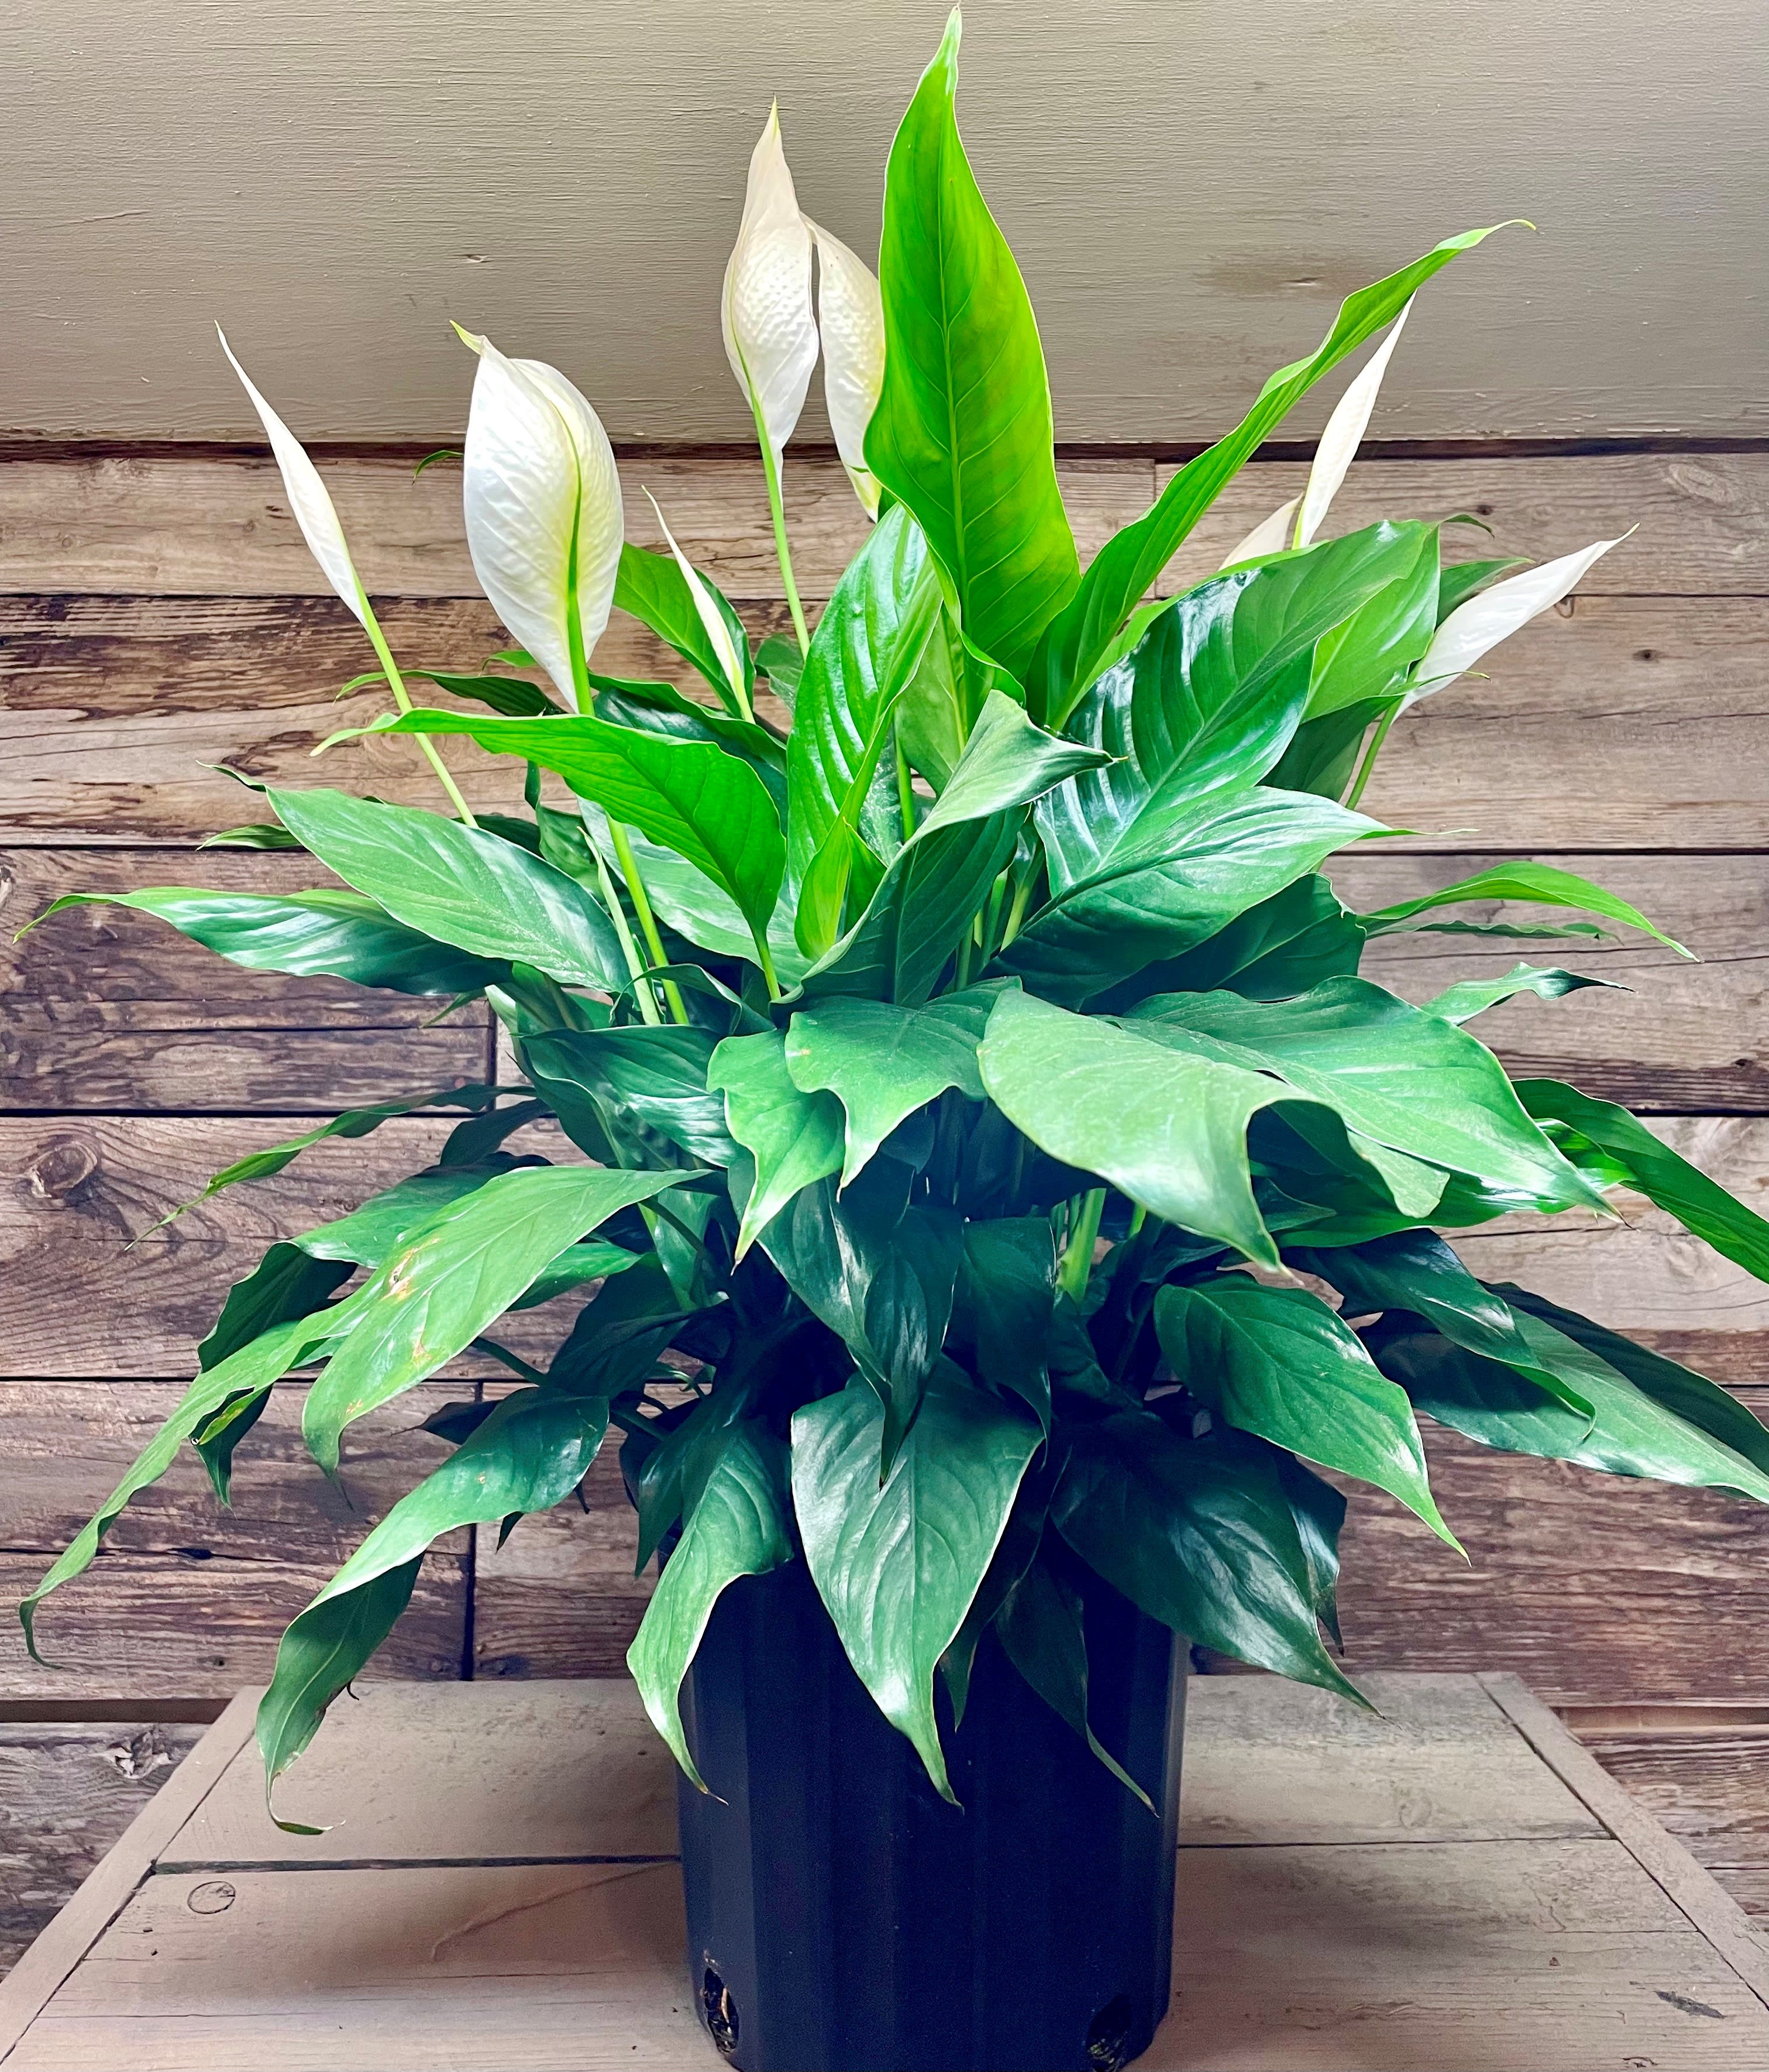 8&quot; Peace Lily (Spathiphyllum) - Peace Lily is an elegant houseplant that does best with bright, indirect light to flower. The white ‘flowers’ are actually a spathe or modified leaf that covers the cream-colored spadix, a cluster of very small, true flowers.